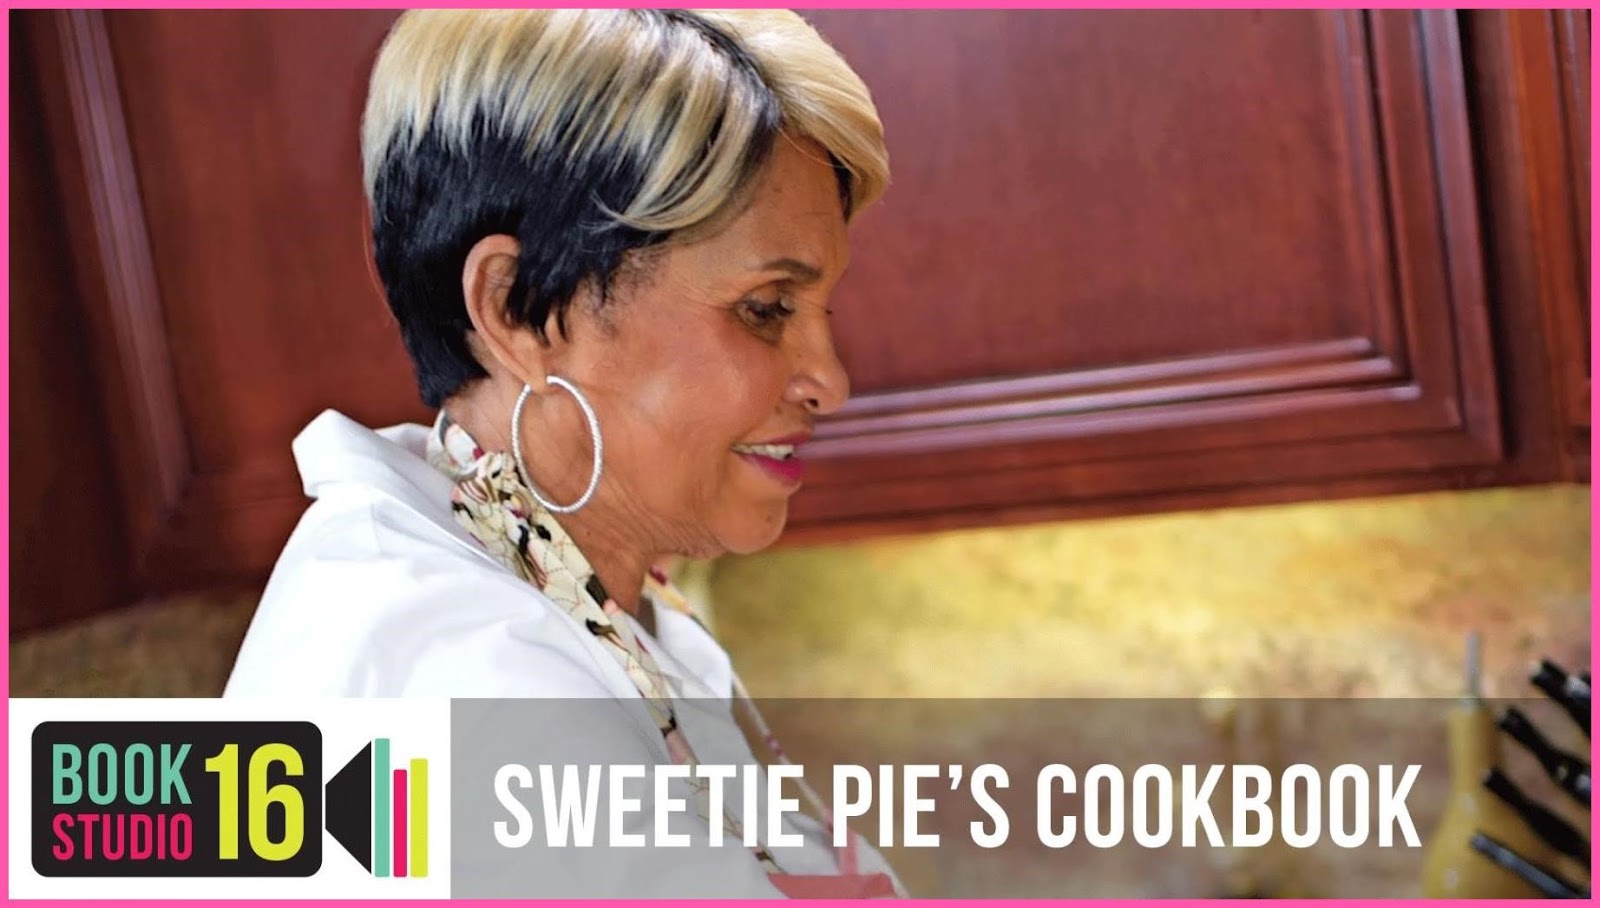 14 Sweetie Pies Kitchen St Louis For the Love Chitlins Sweetie Pie's Cookbook Sweetie,Pies,Kitchen